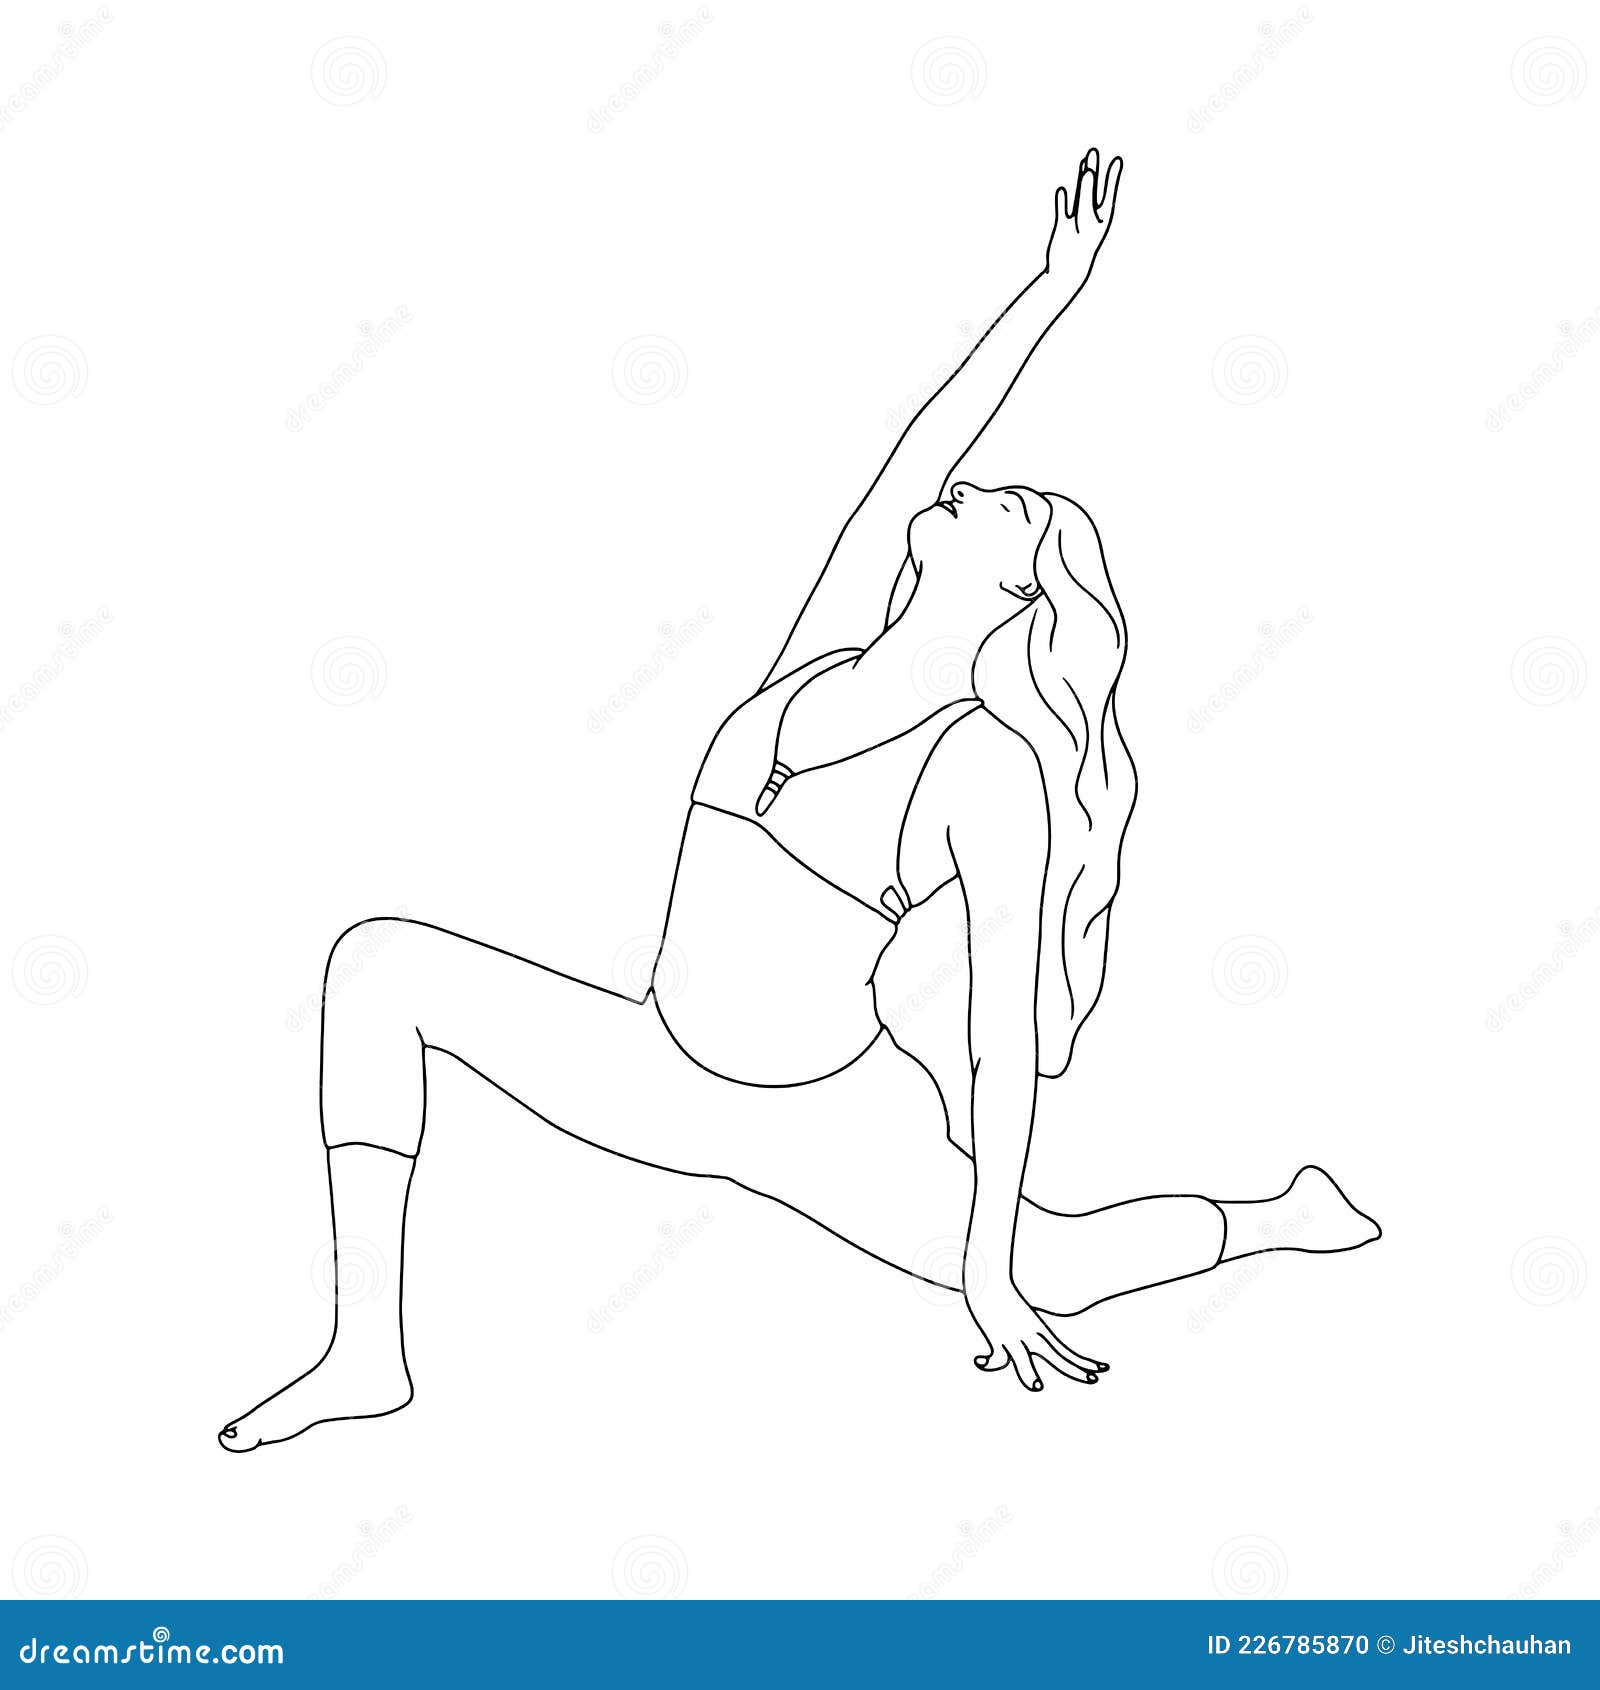 Yoga Coloring Book for Kids: Yoga Poses and Asanas for Kids Coloring Book  and Activity Book | Ages 4-8 : Amazon.in: Books